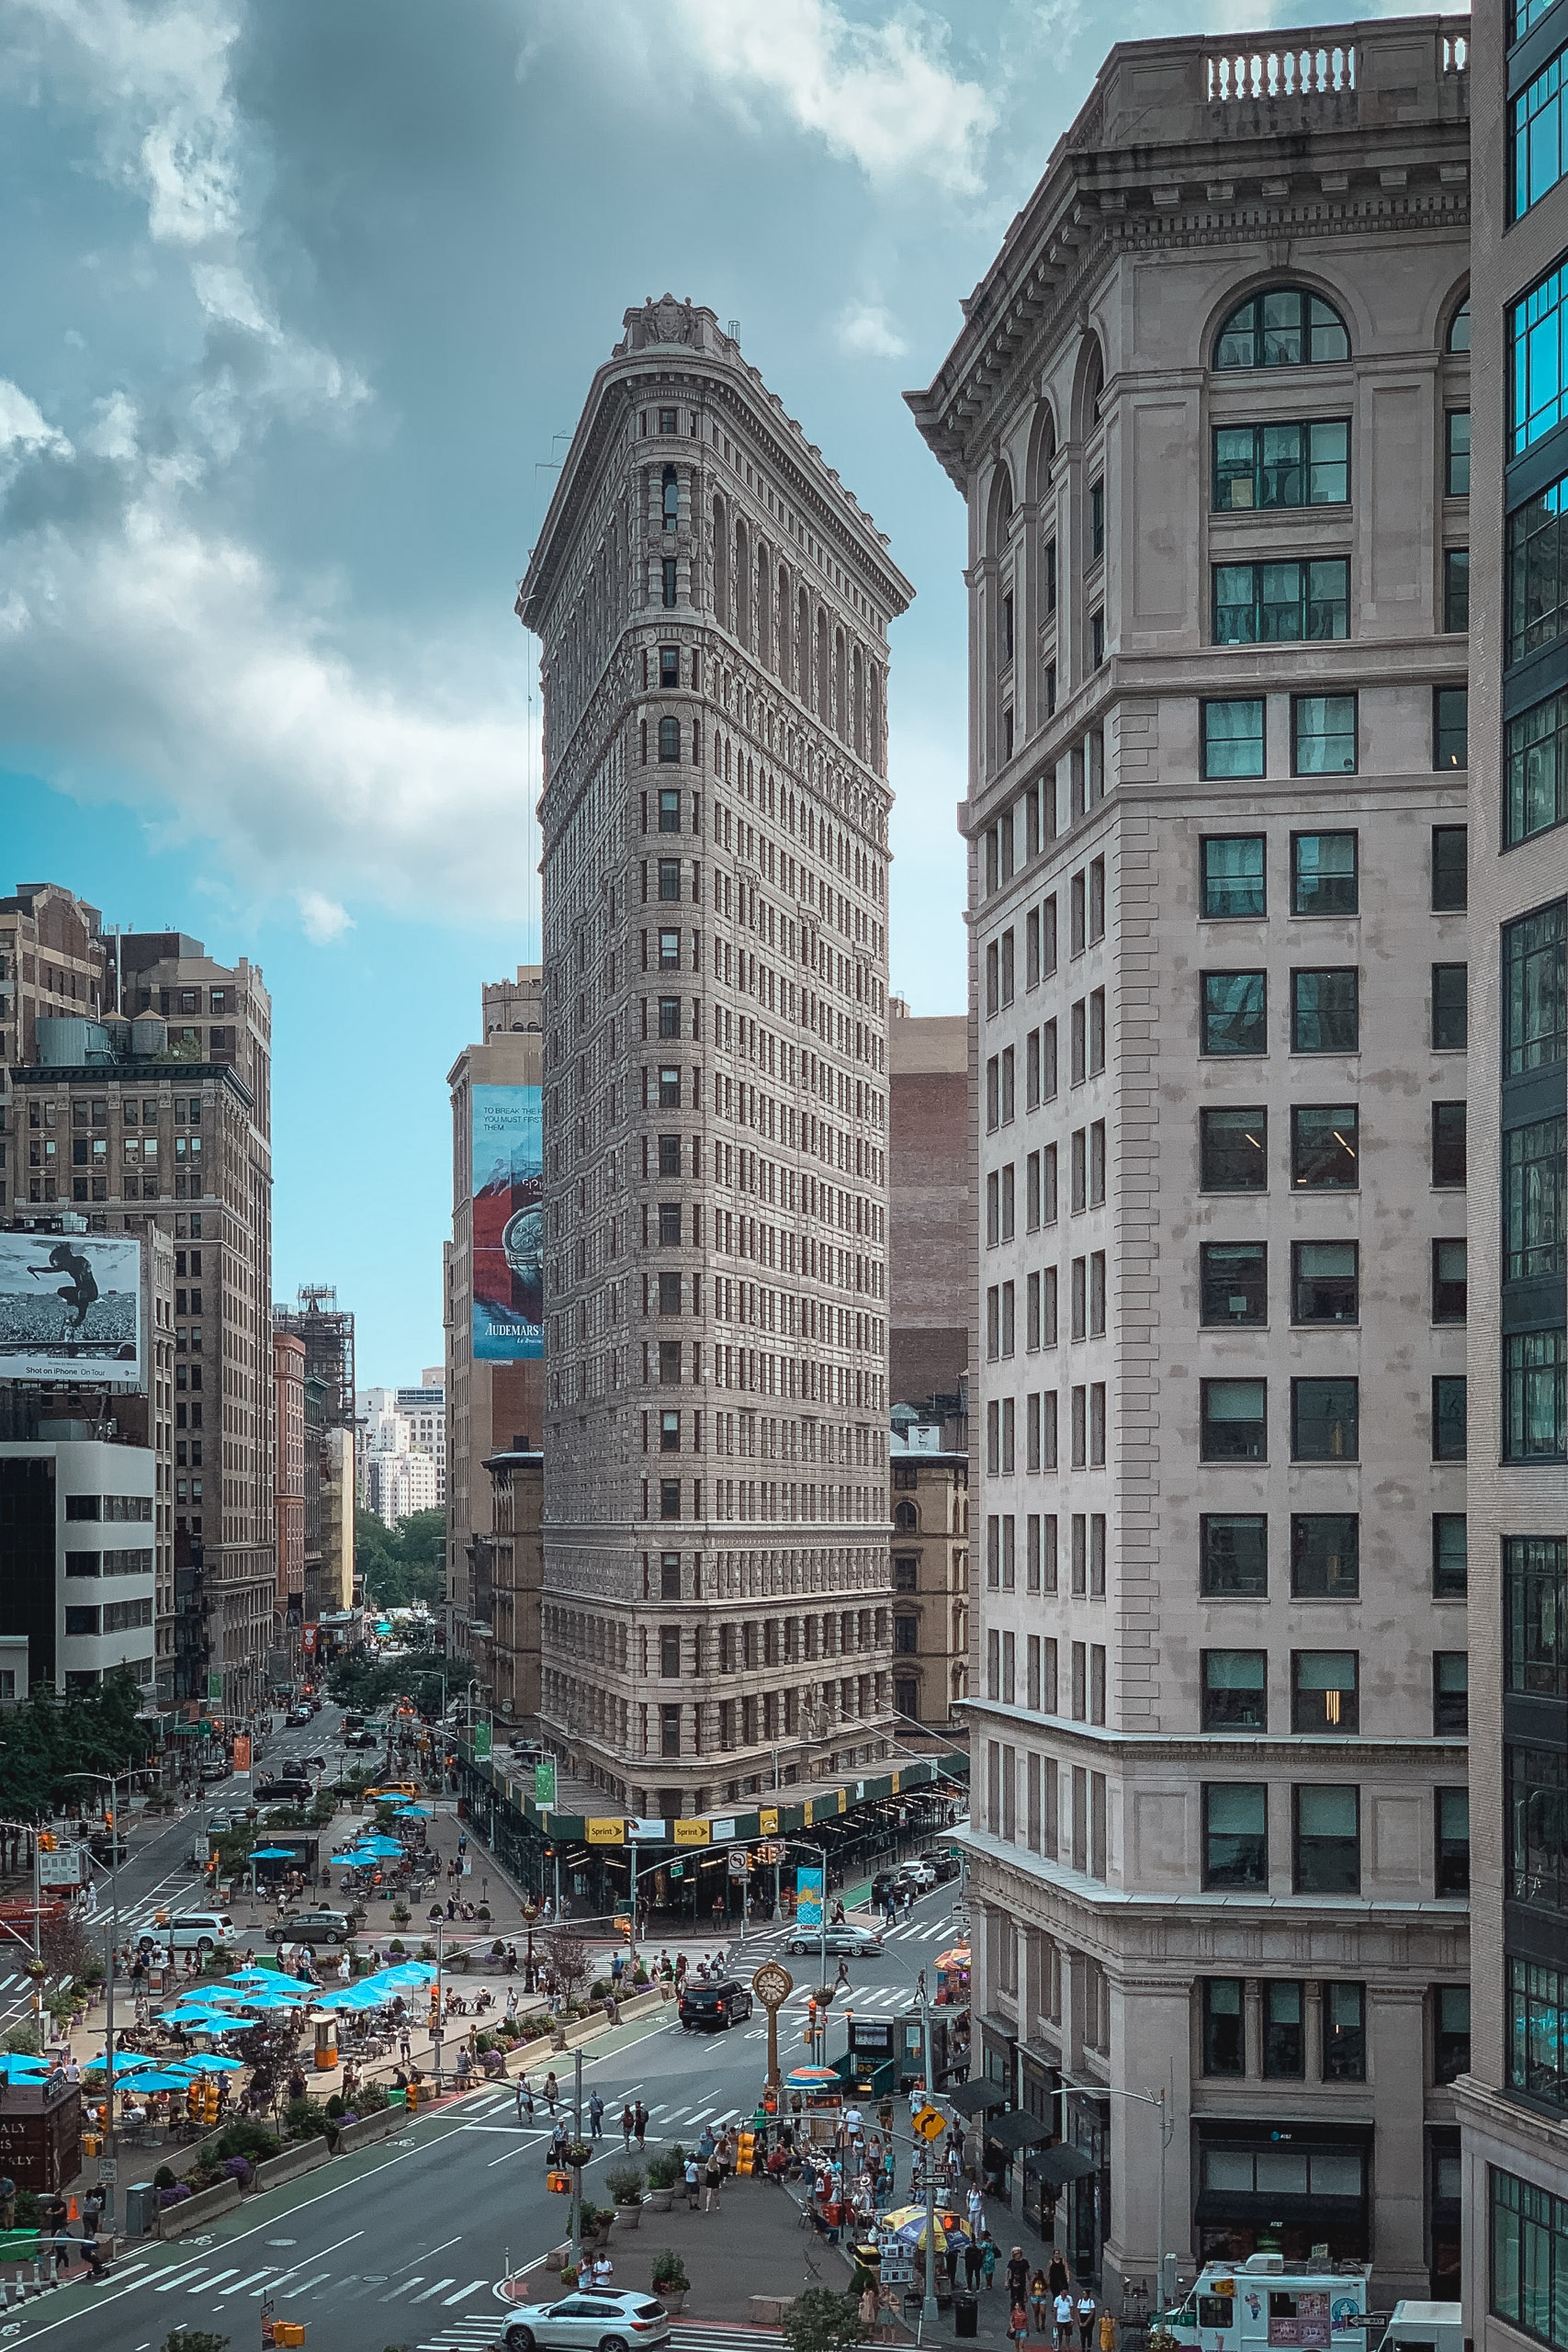 The Flatiron Building from Porcelanosa II